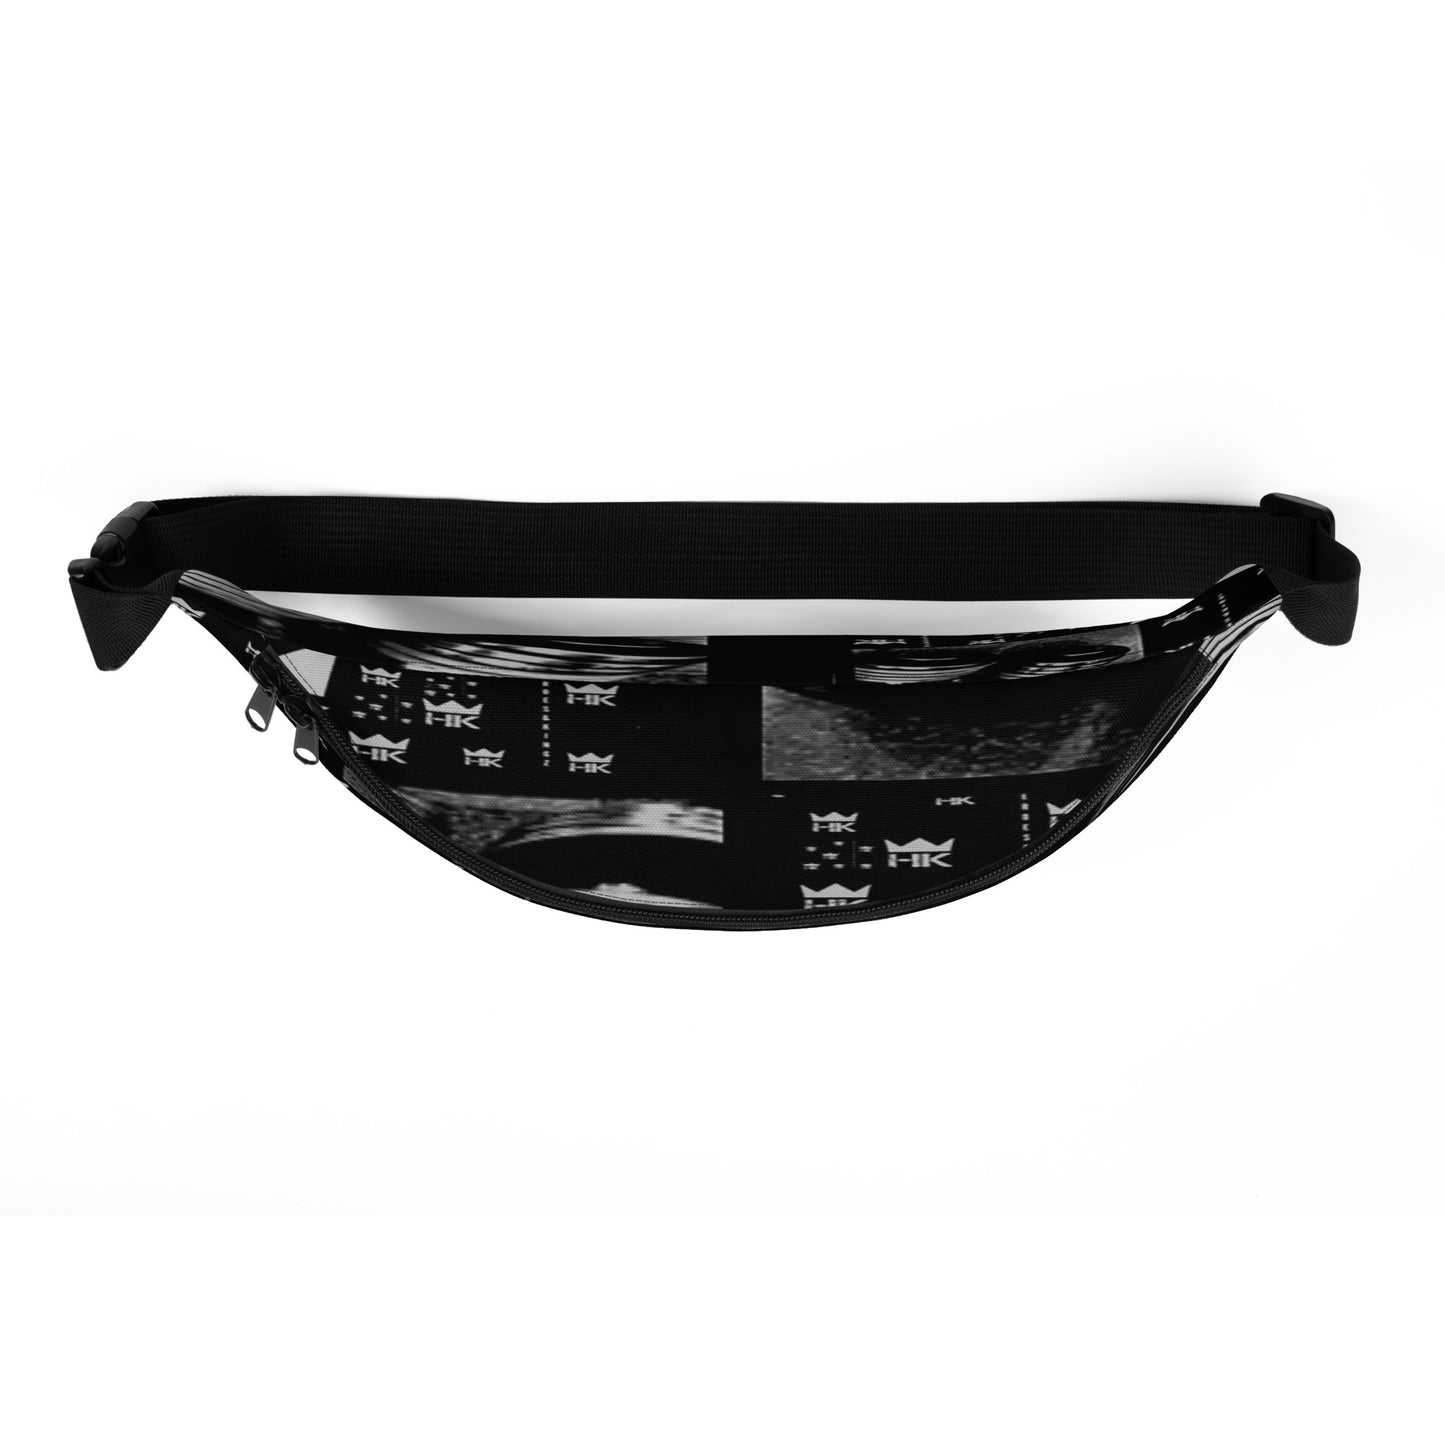 H & K The Weights Fanny Pack